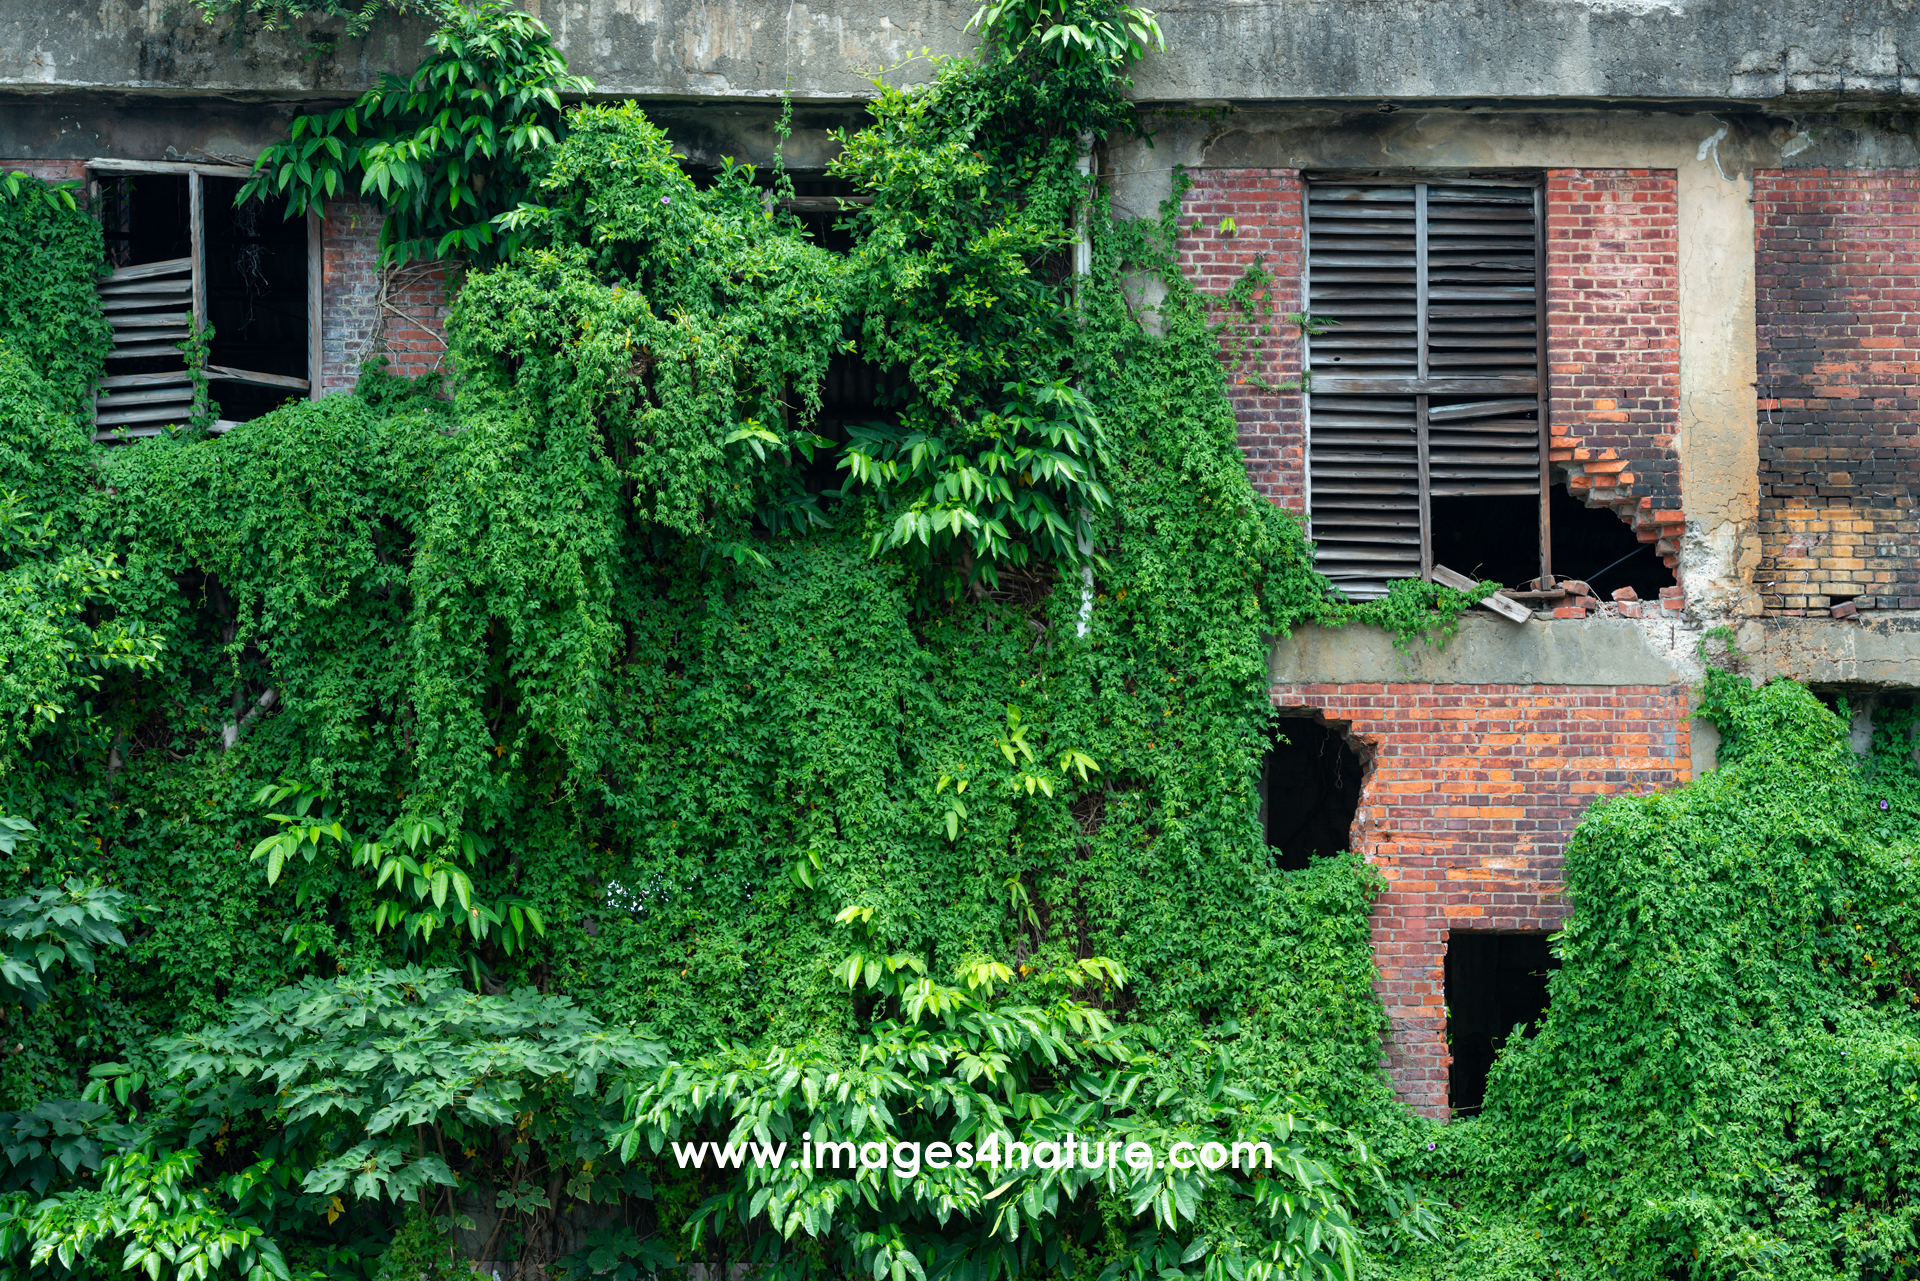 An old factory made of red bricks, almost completely overgrown by vegetation reclaiming natures territory